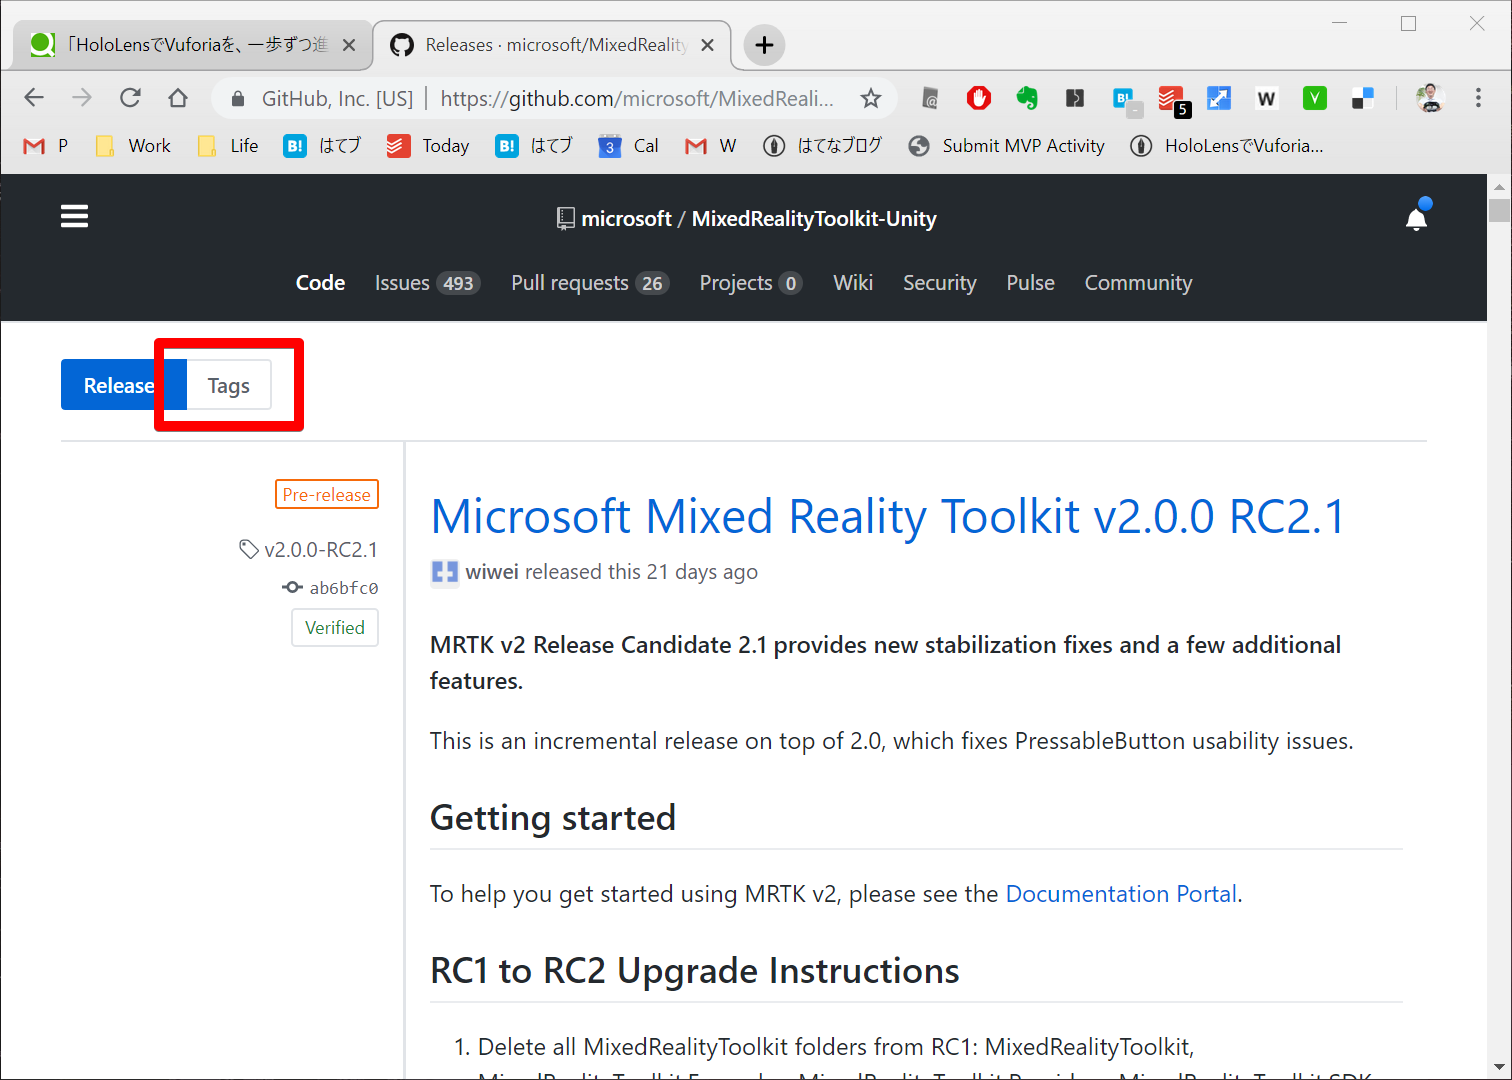 Releases · microsoft_MixedRealityToolkit-Unity - Google Chrome 2019-07-05 08.06.54.png